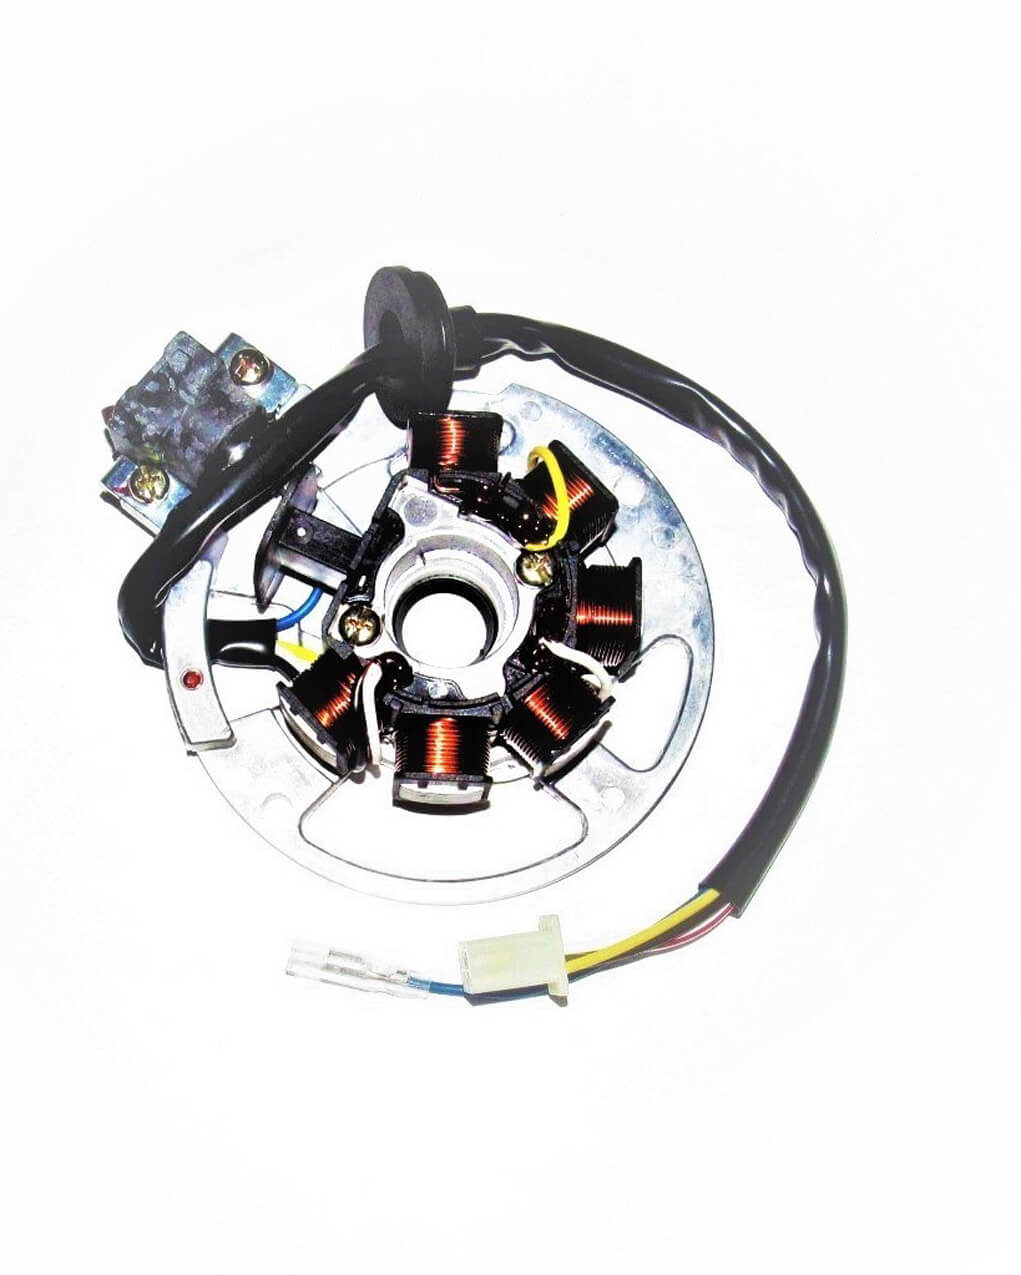 Stator 2 Stroke Fits E-Ton Beamer 50, Matrix 50, Adly, 49cc Scooters + other brands (Top Quality-Power, Made in Taiwan)